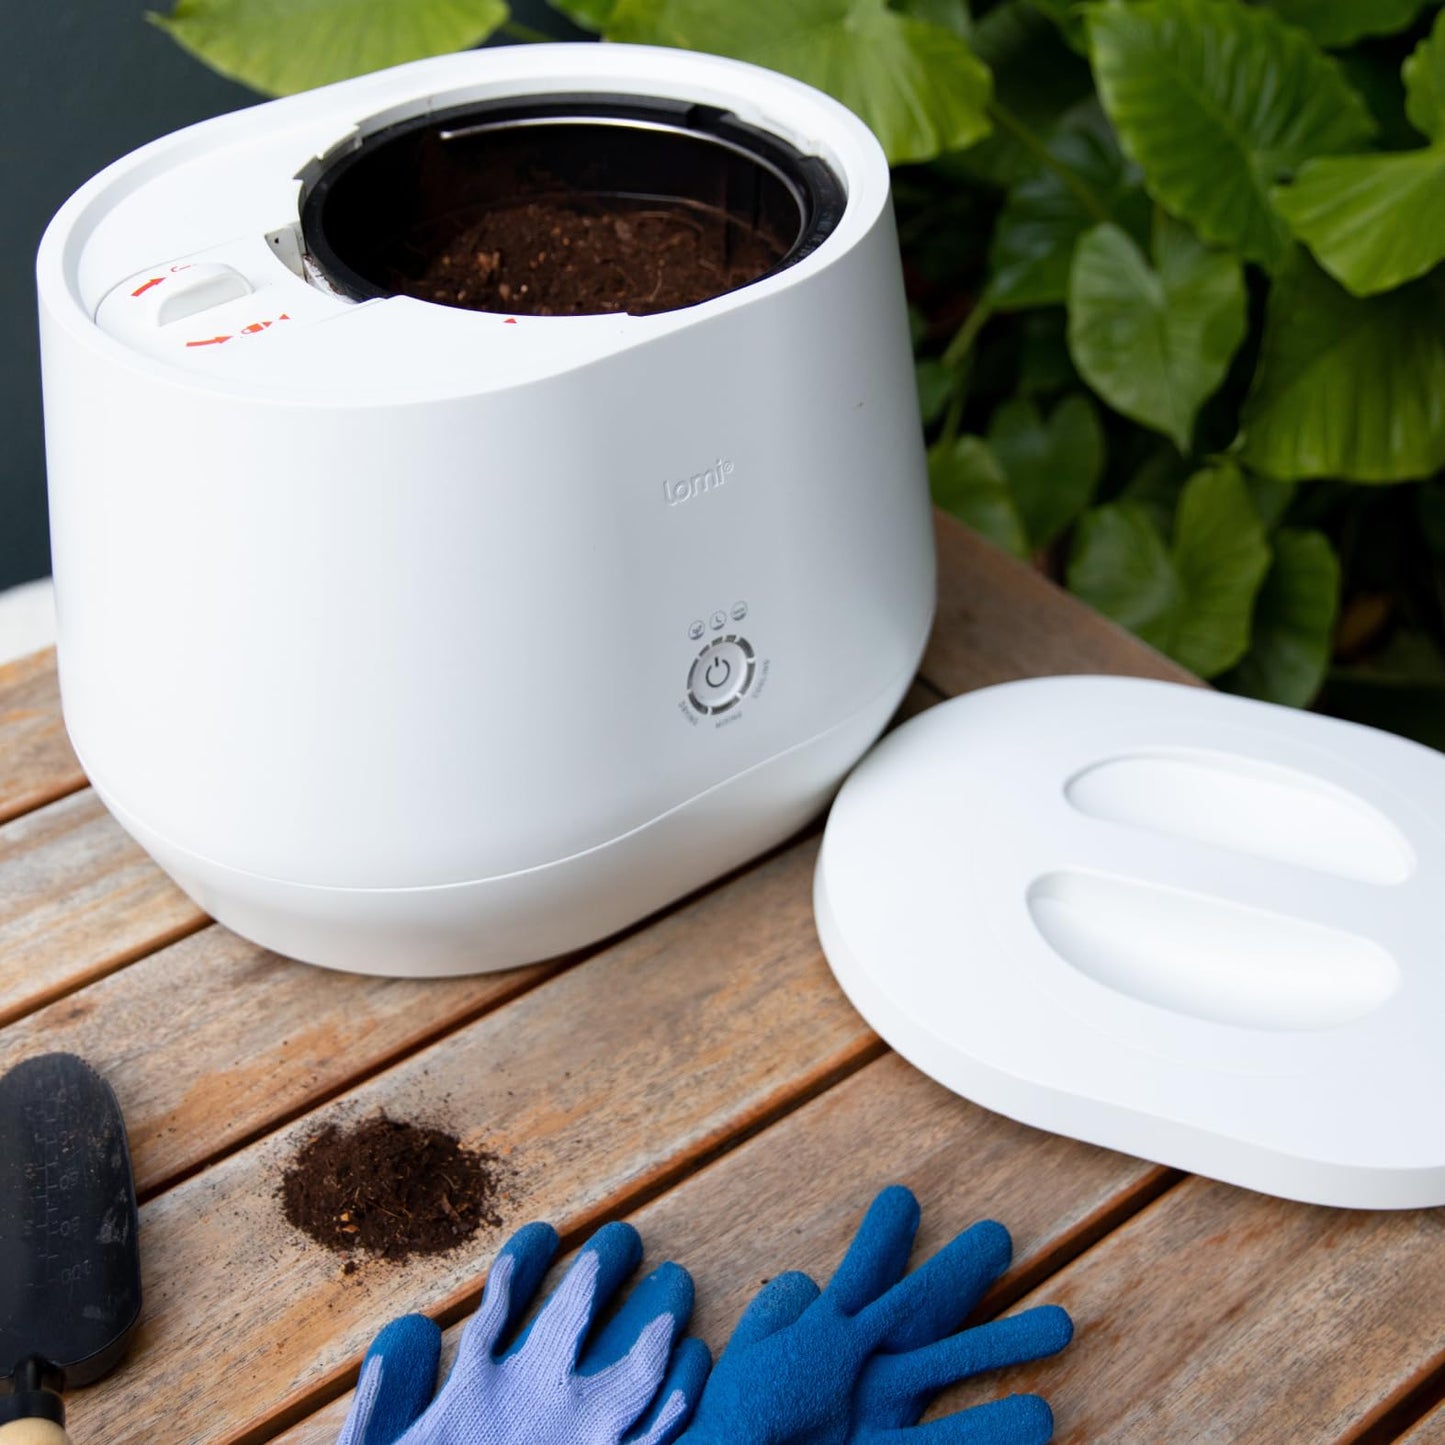 Lomi 1 | World’s First Smart Waste™ Home Food Upcycler | Turn Waste into Natural Fertilizer with a Single Button with Lomi 1, The Smart Waste™ Electric Kitchen Food Recycler